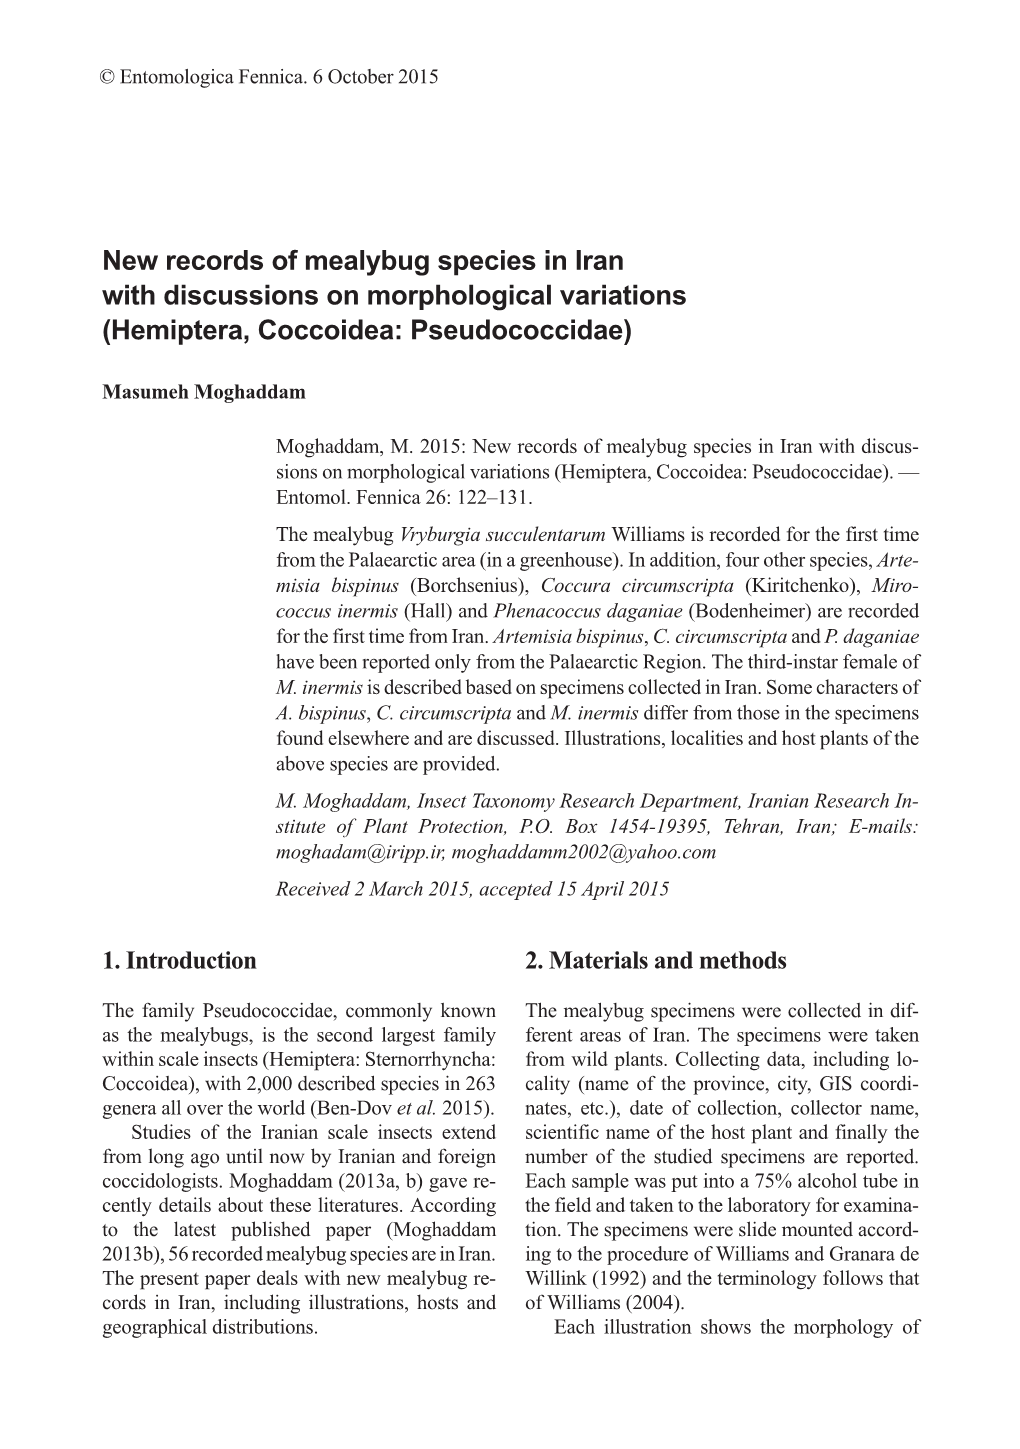 New Records of Mealybug Species in Iran with Discussions on Morphological Variations (Hemiptera, Coccoidea: Pseudococcidae)